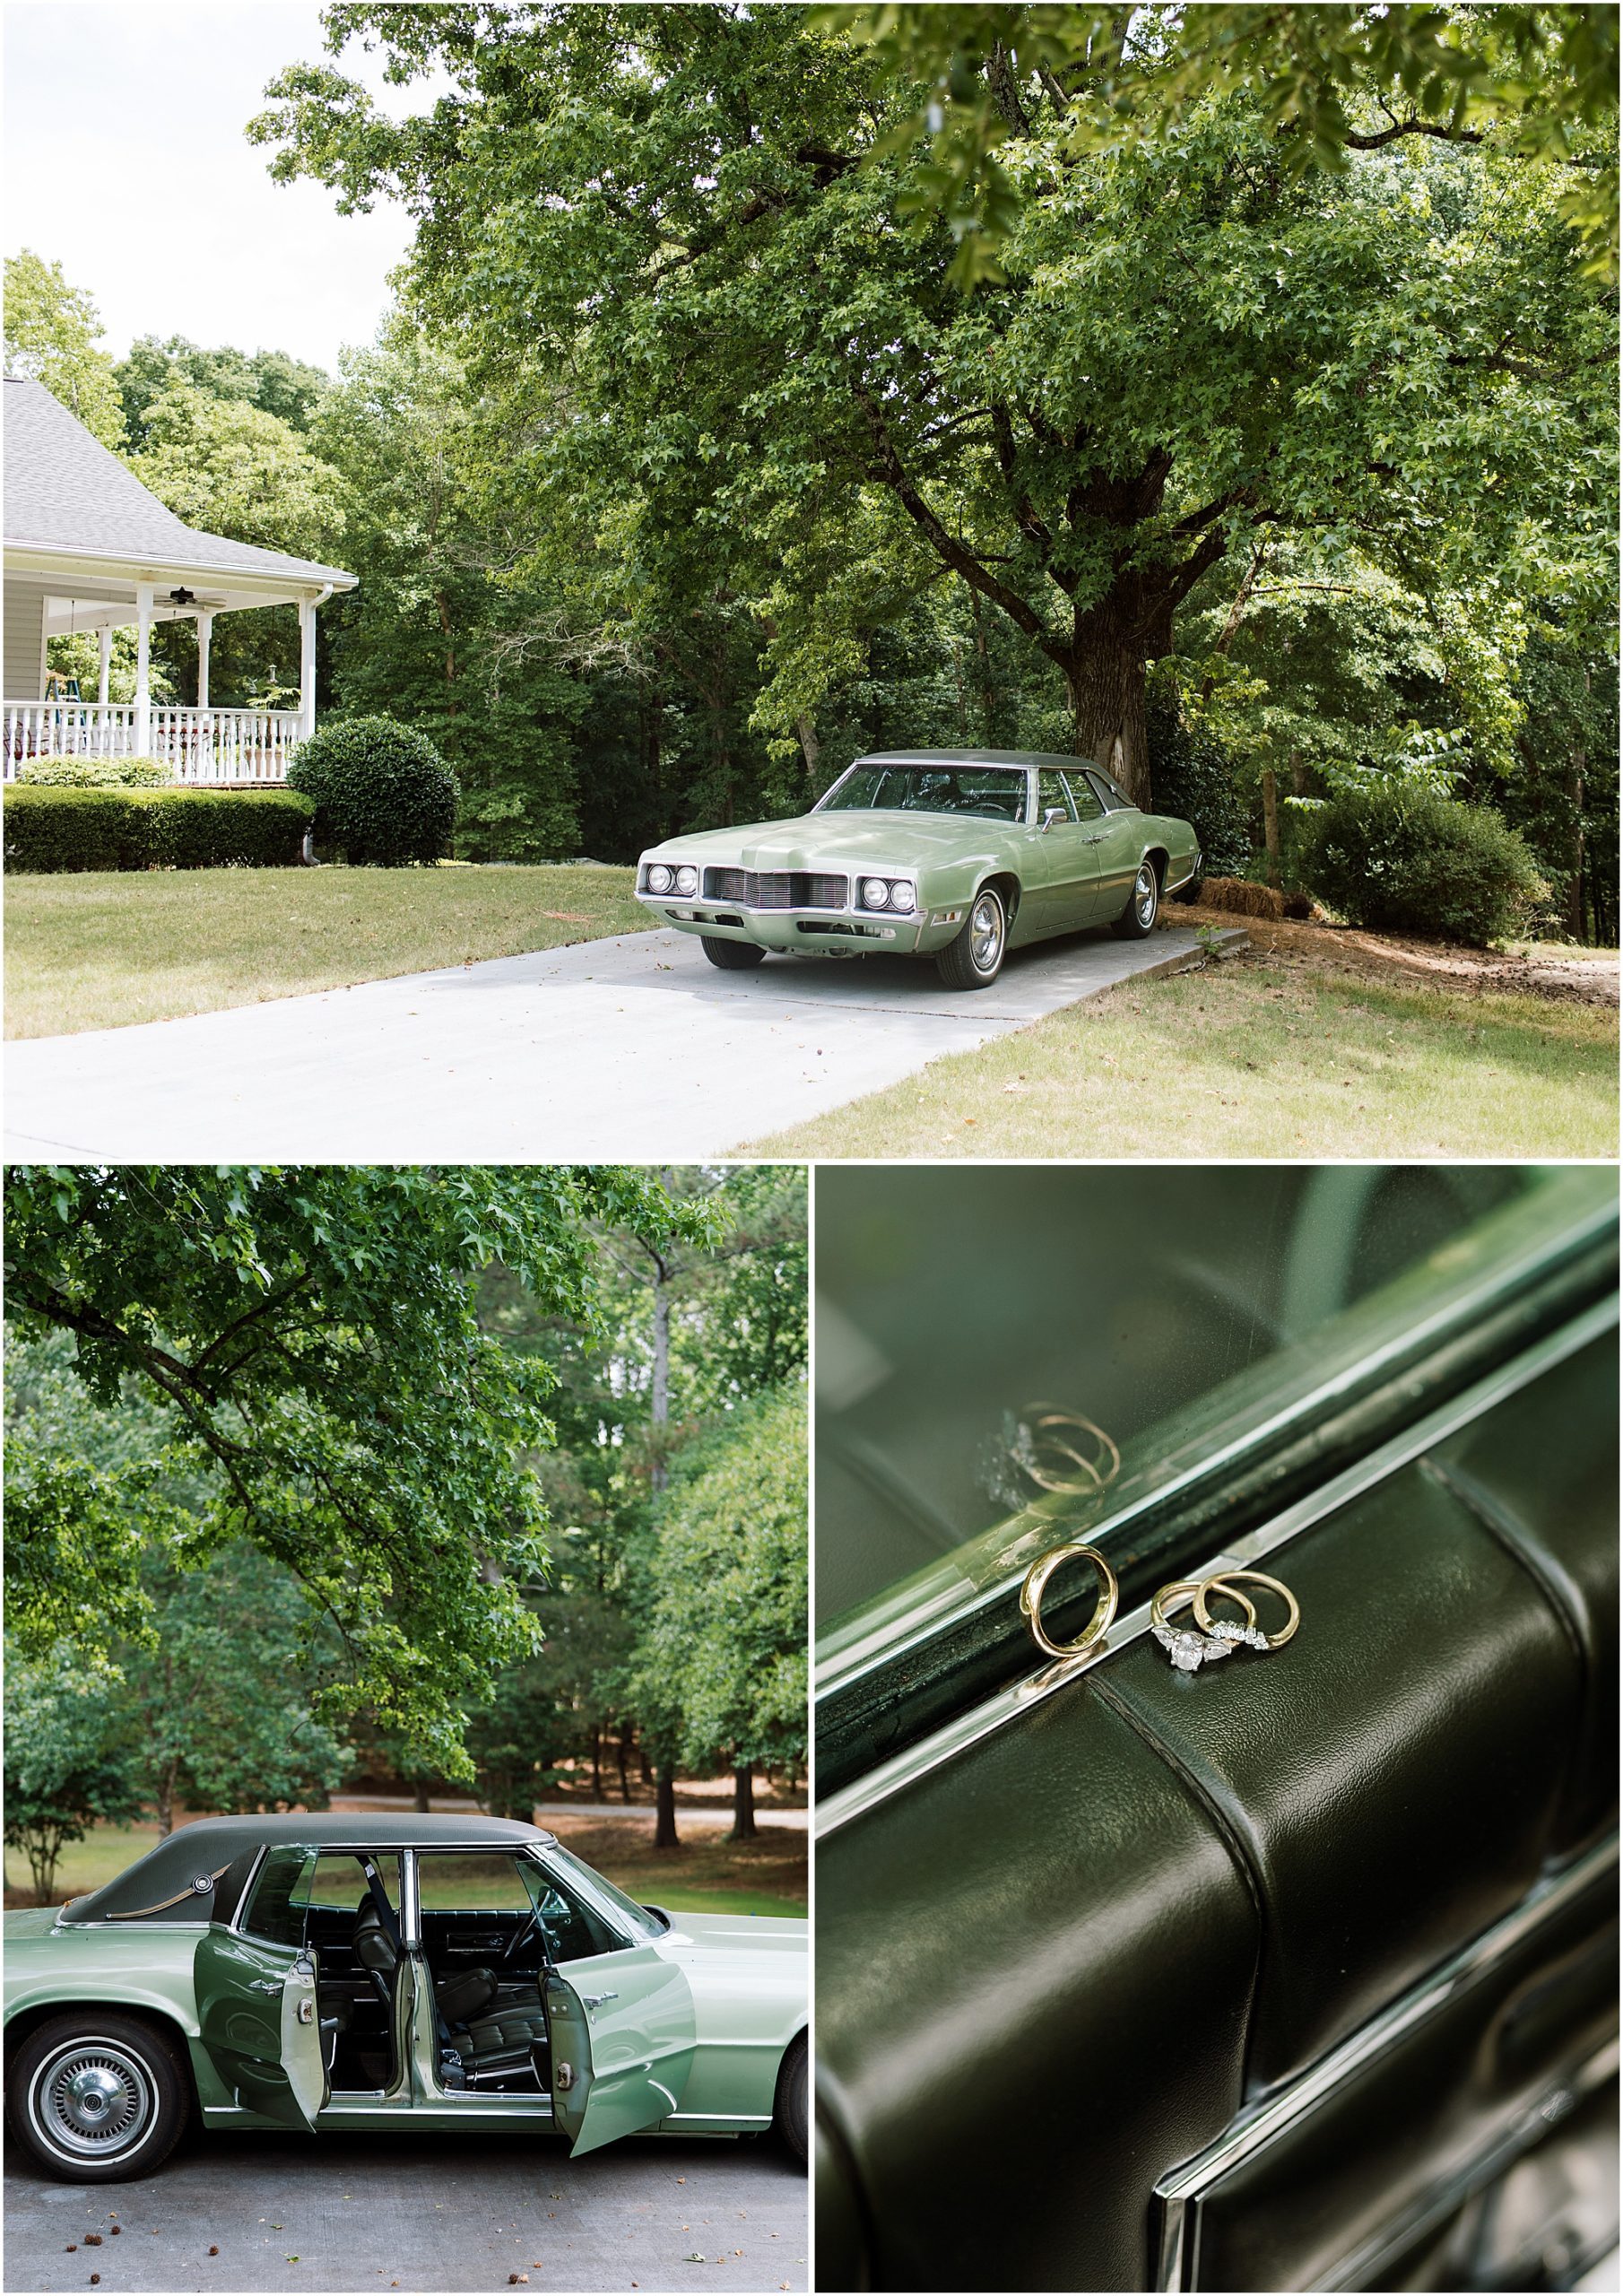 Green vintage getaway car in the driveway with the wedding rings sitting on the window